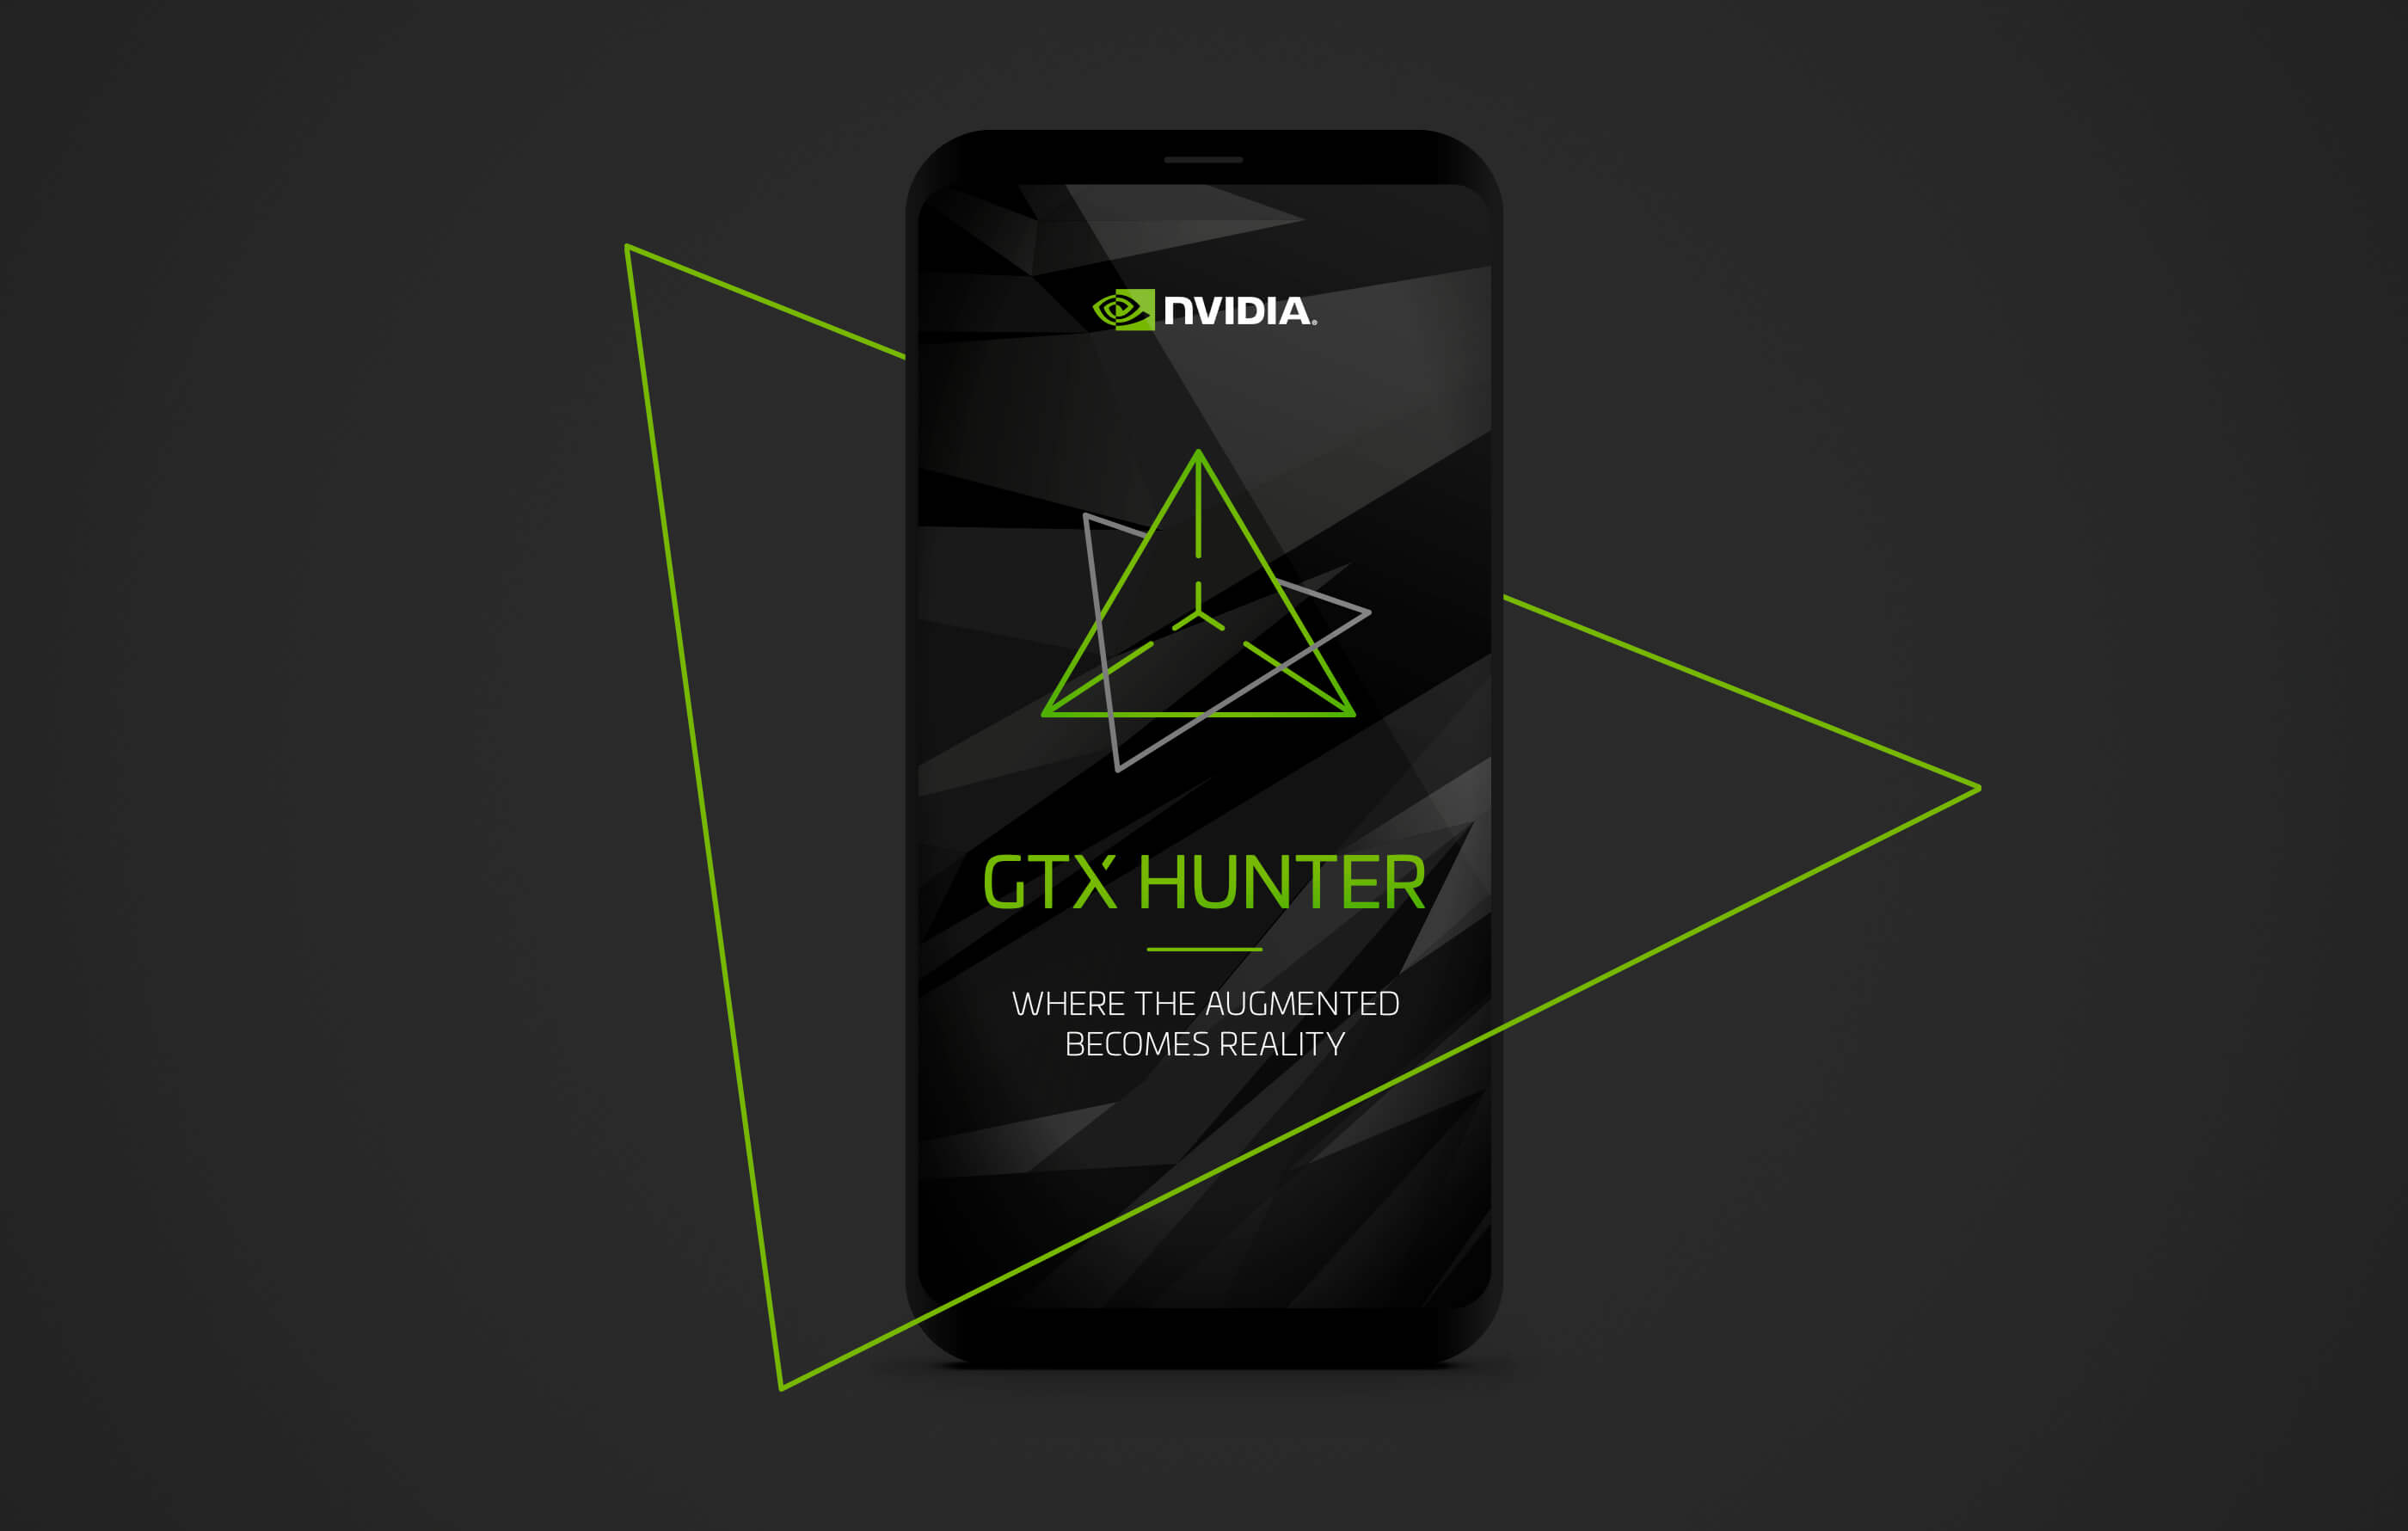 Final splash screen UI design of the Nvidia GTX Hunter app, featuring the green and grey logo centered on a black background